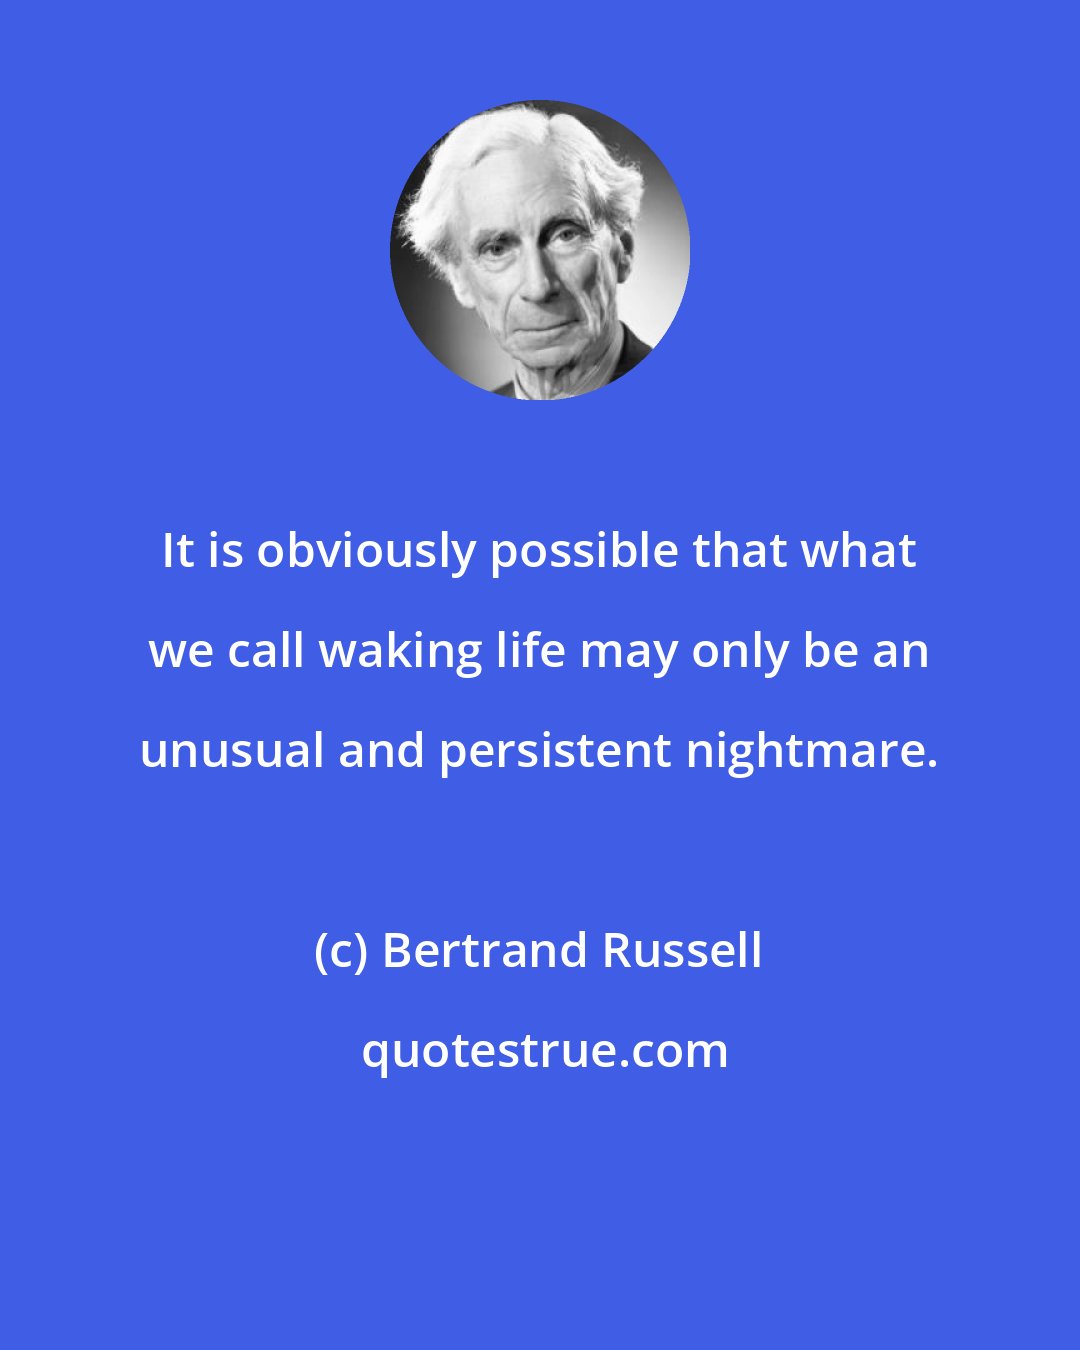 Bertrand Russell: It is obviously possible that what we call waking life may only be an unusual and persistent nightmare.